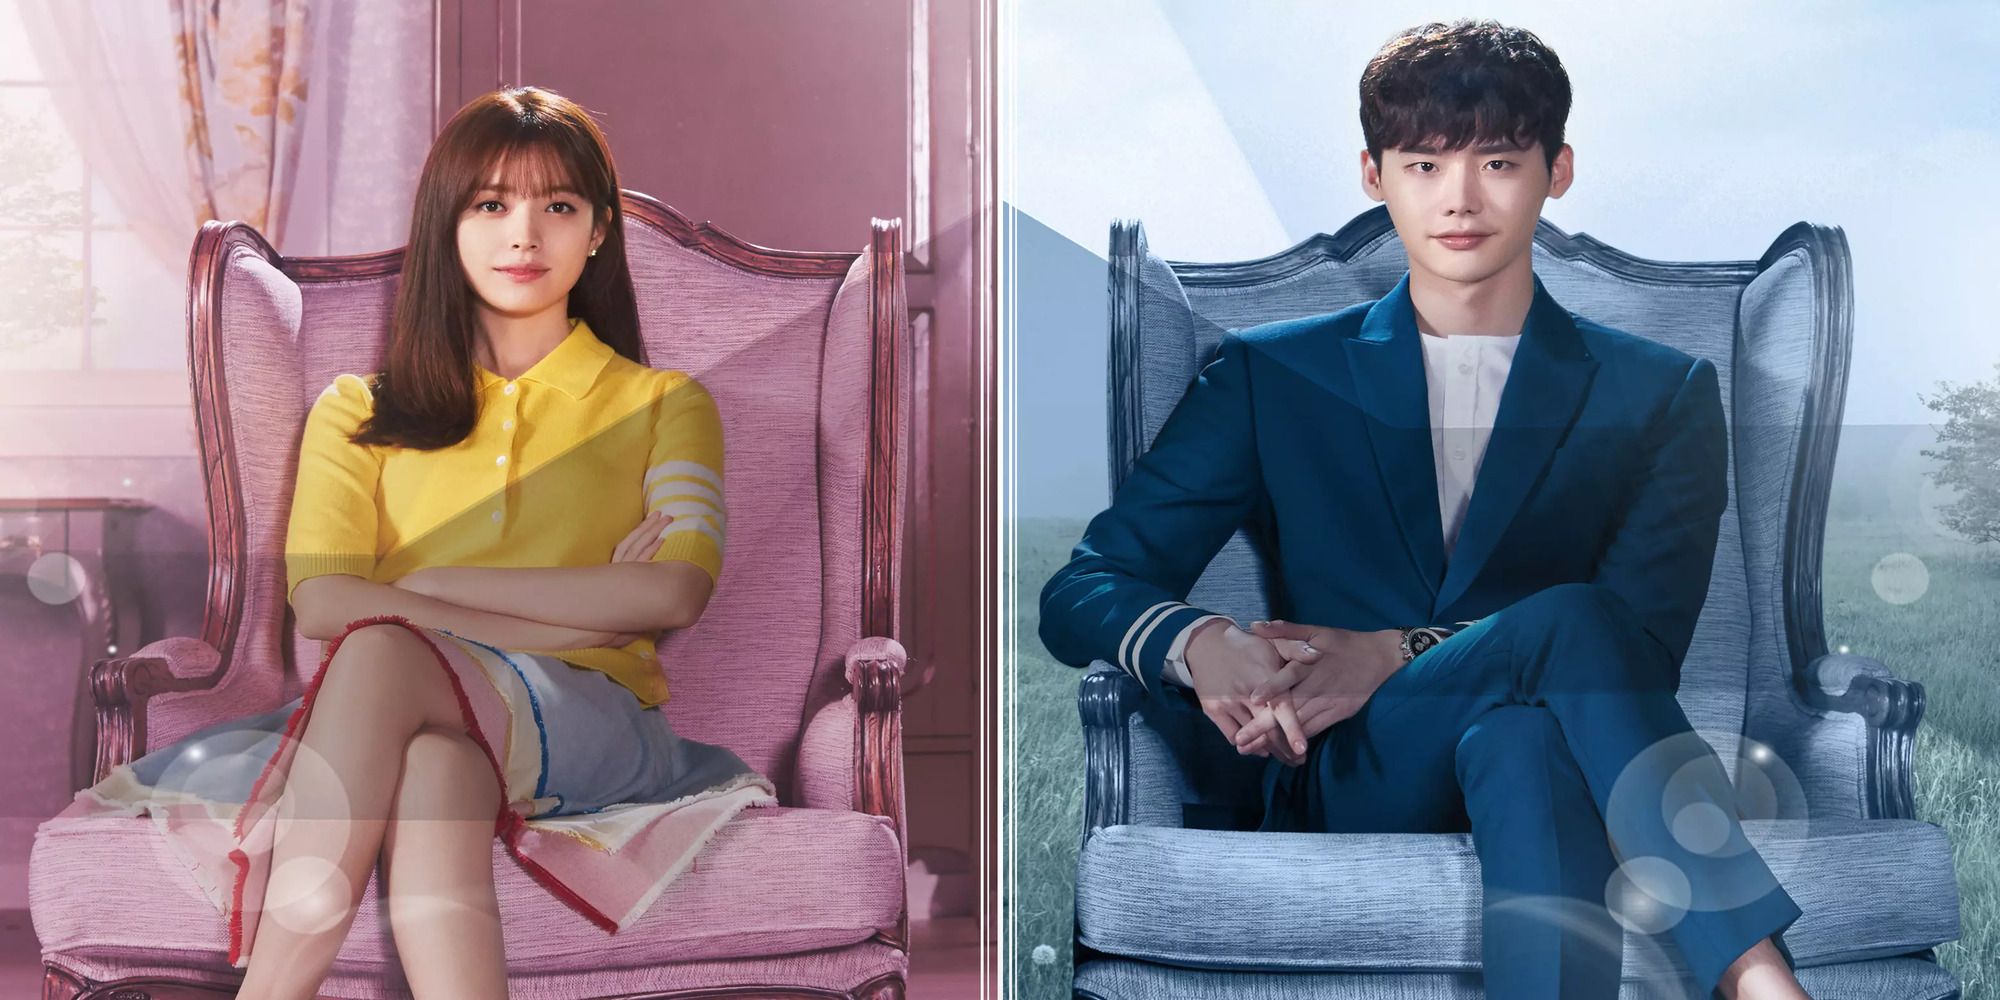 W: Two Worlds Apart featuring Oh Yeon-joo and Kang Chul